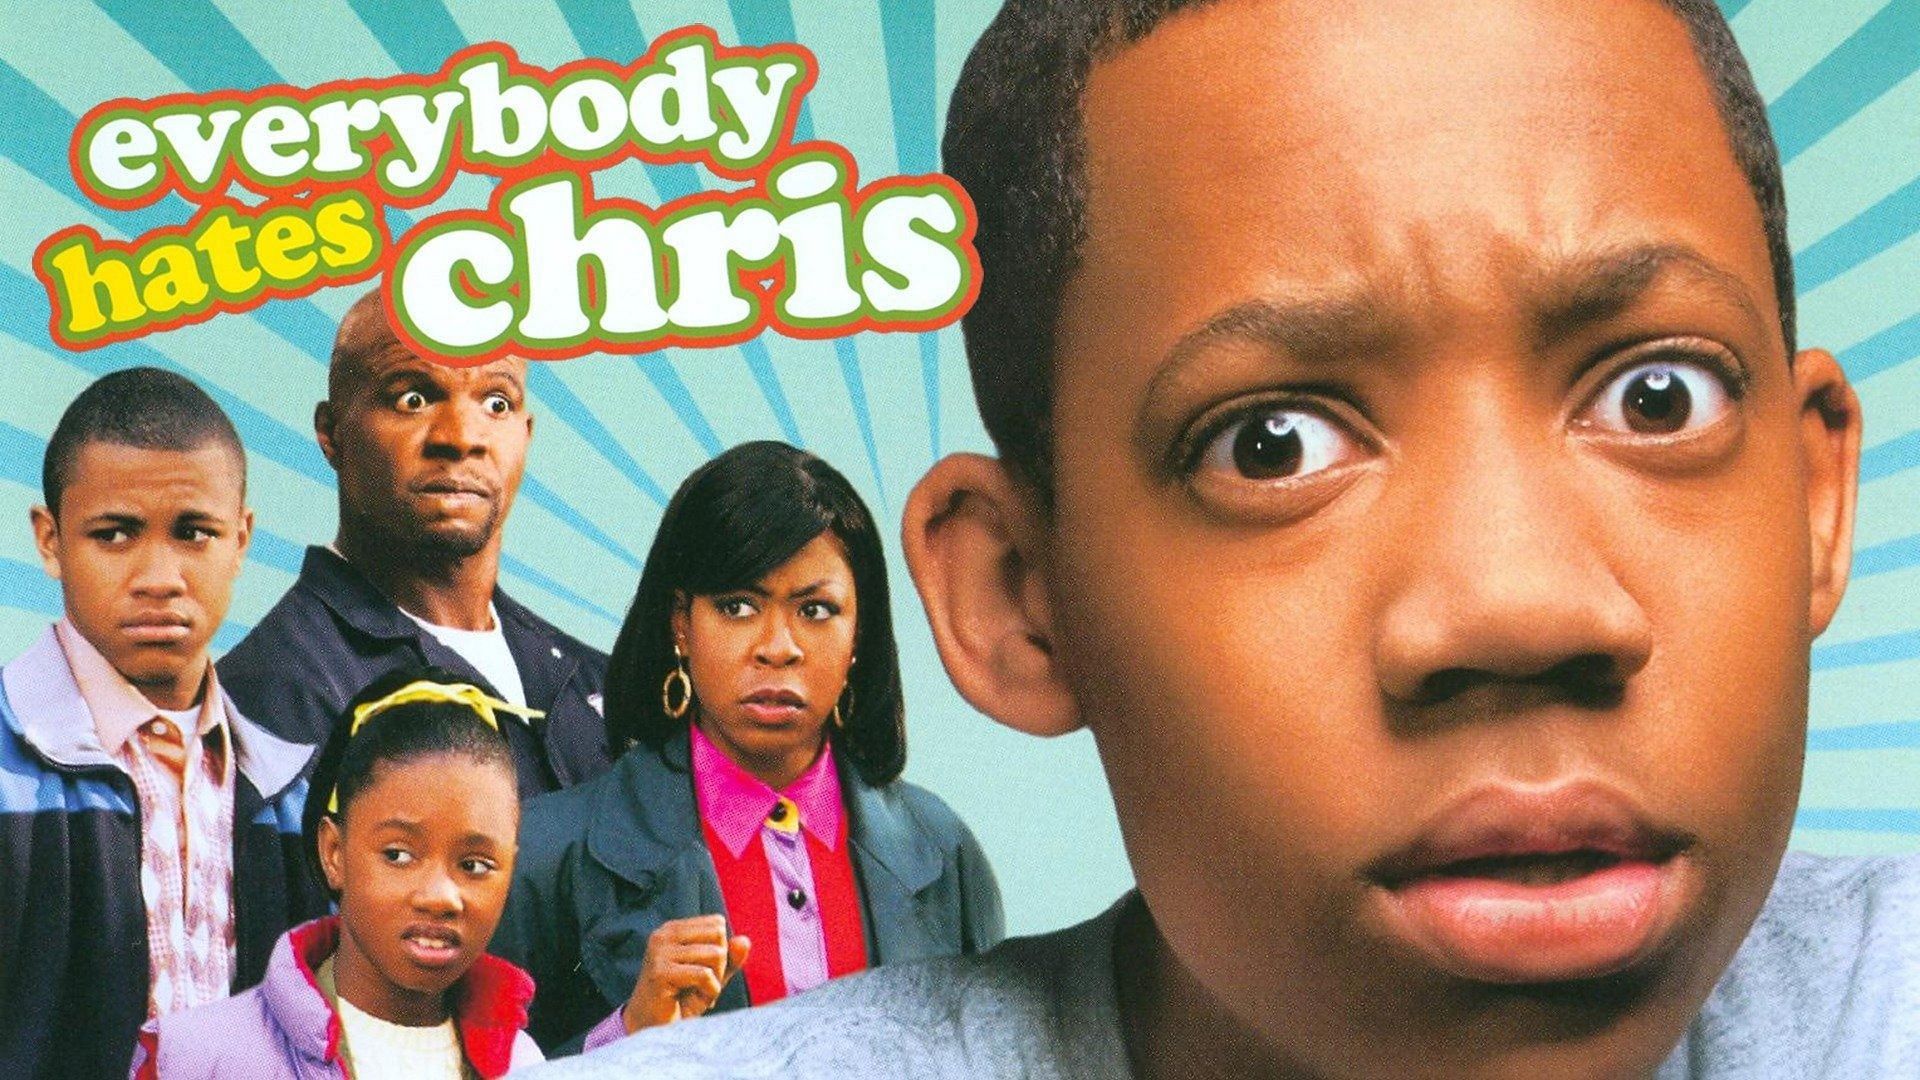 Is Everybody Hates Chris the best show on CW?